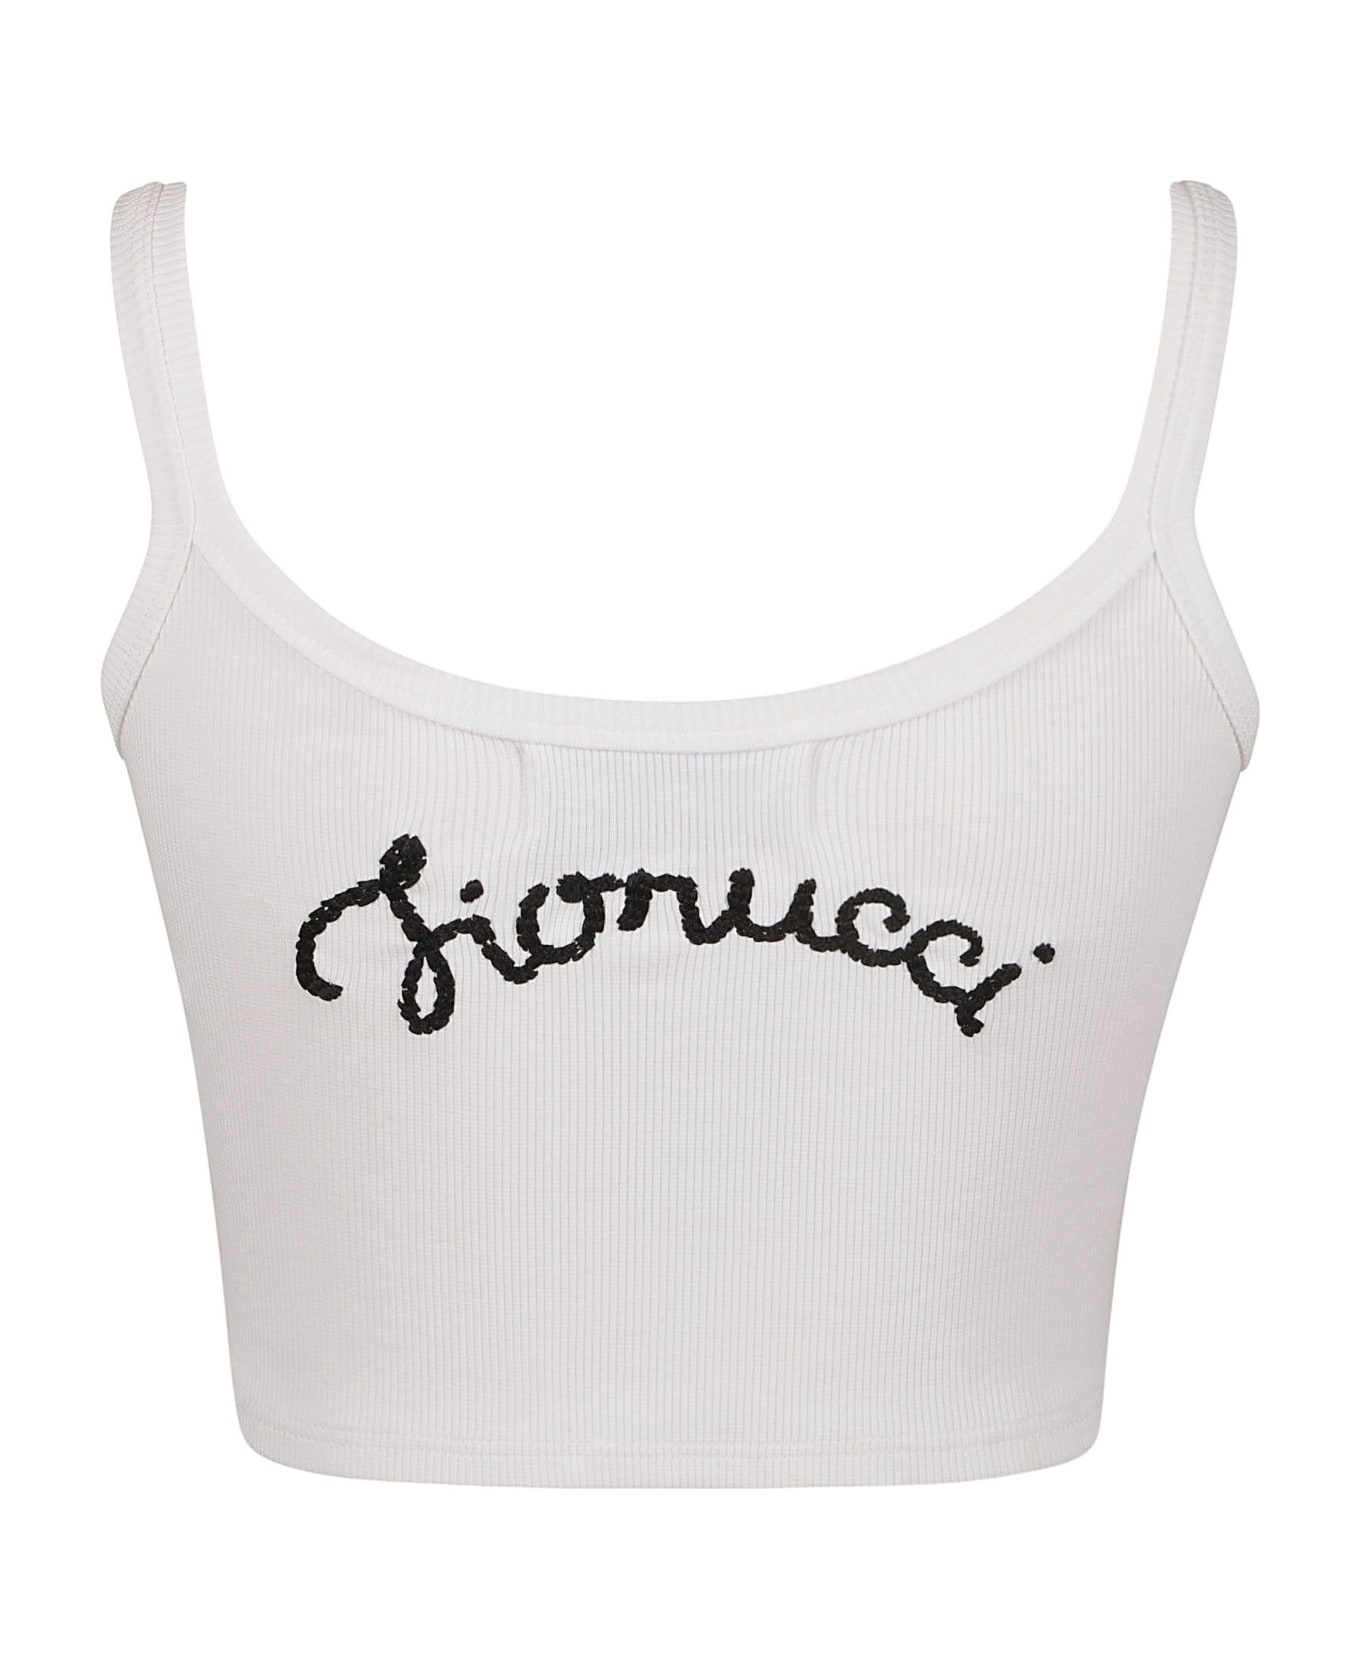 Fiorucci Embroidered Cropped Tank Top - White トップス